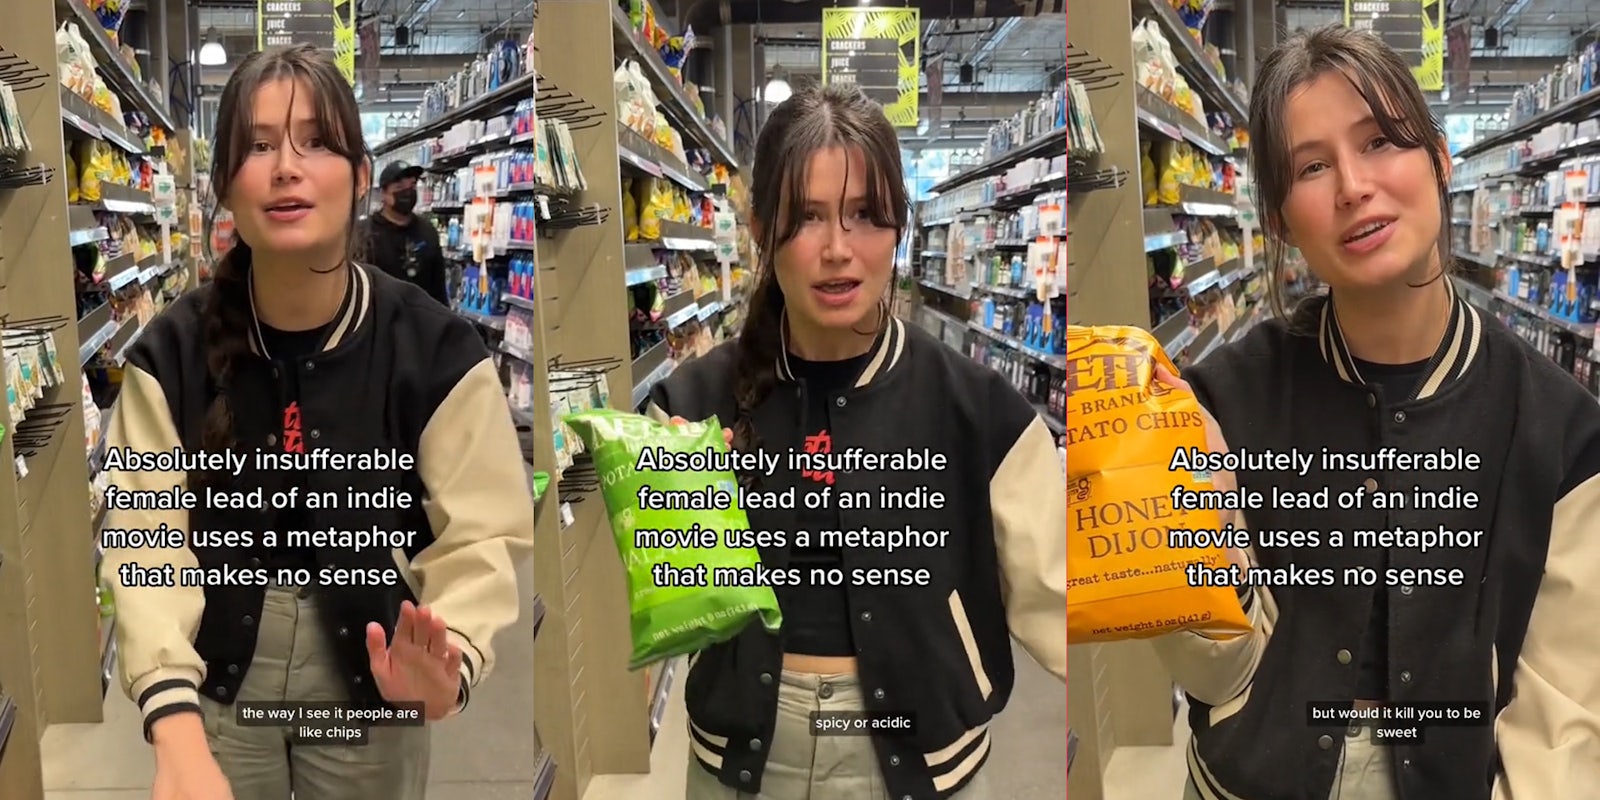 person speaking in store with caption 'Absolutely insufferable female lead of an indie movie that uses a metaphor that makes no sense' 'the way I see it people are like chips' (l) person speaking in store with caption 'Absolutely insufferable female lead of an indie movie that uses a metaphor that makes no sense' 'spicy or acidic' (c) person speaking in store with caption 'Absolutely insufferable female lead of an indie movie that uses a metaphor that makes no sense' 'but would it kill you to be sweet' (r)